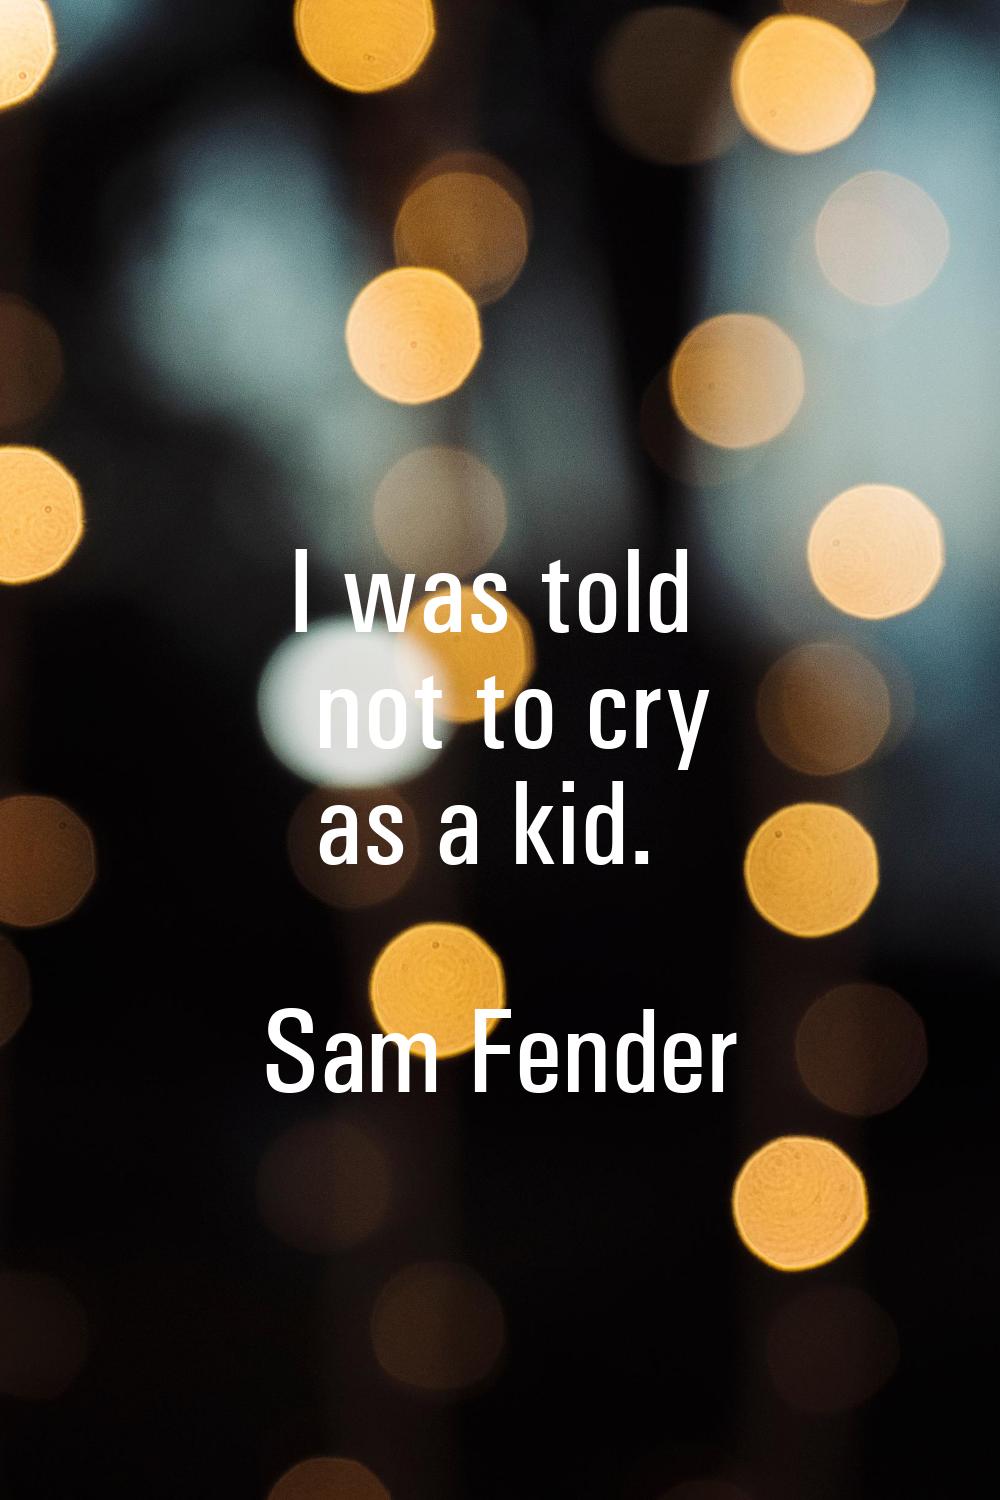 I was told not to cry as a kid.